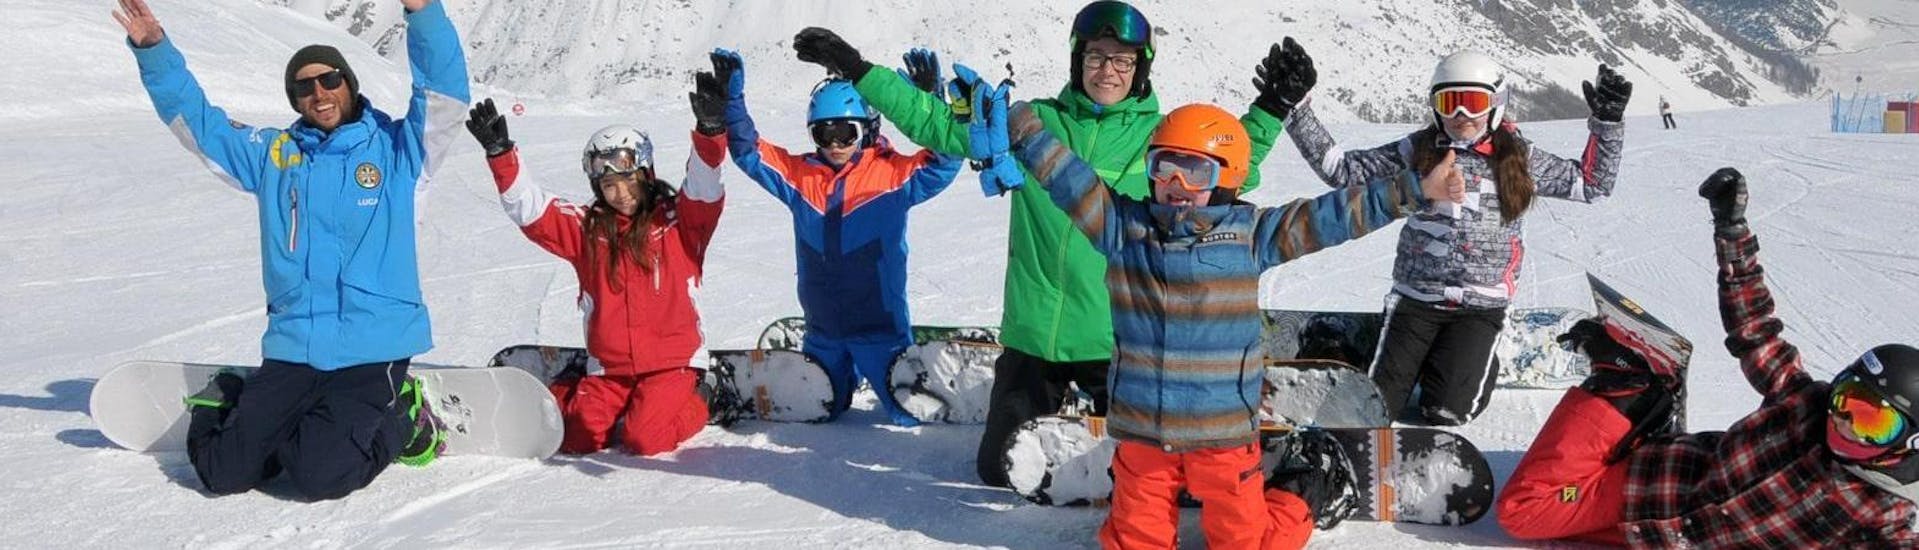 A group of kids is having fun in the snow alongside their snowbord instructor from the ski school Scuola di Sci Azzurra Livigno during their Snowboarding Lessons for Kids & Adults - All Levels.